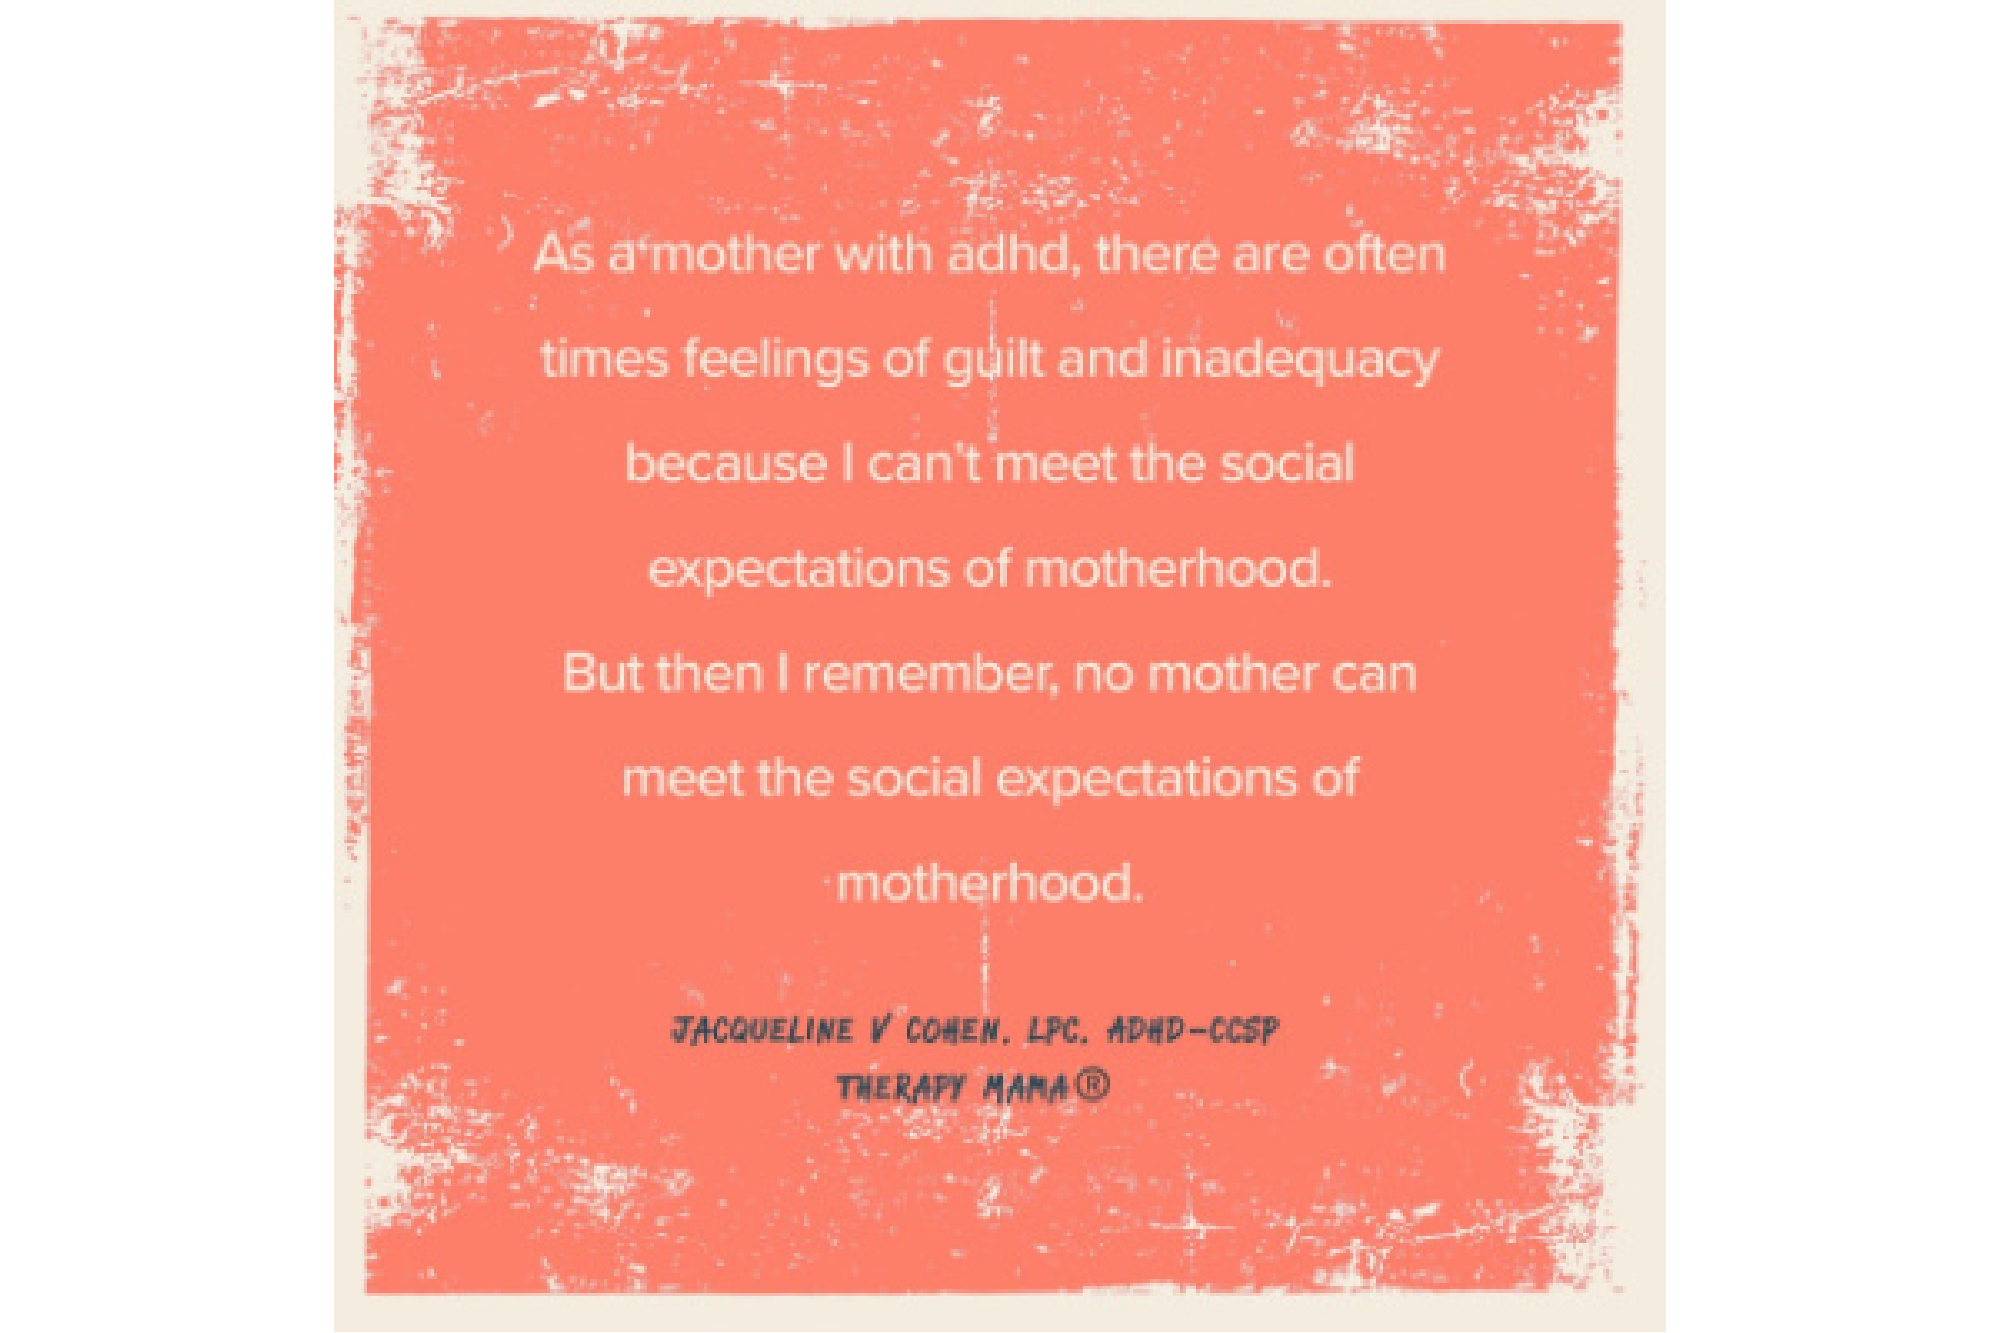 Message about Motherhood and ADHD